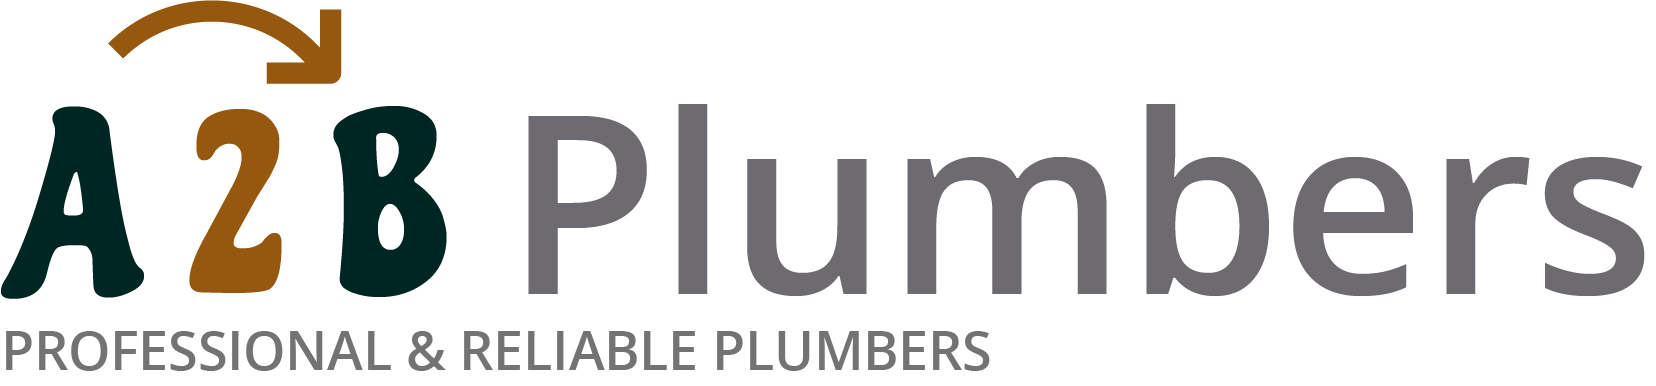 If you need a boiler installed, a radiator repaired or a leaking tap fixed, call us now - we provide services for properties in Taunton and the local area.